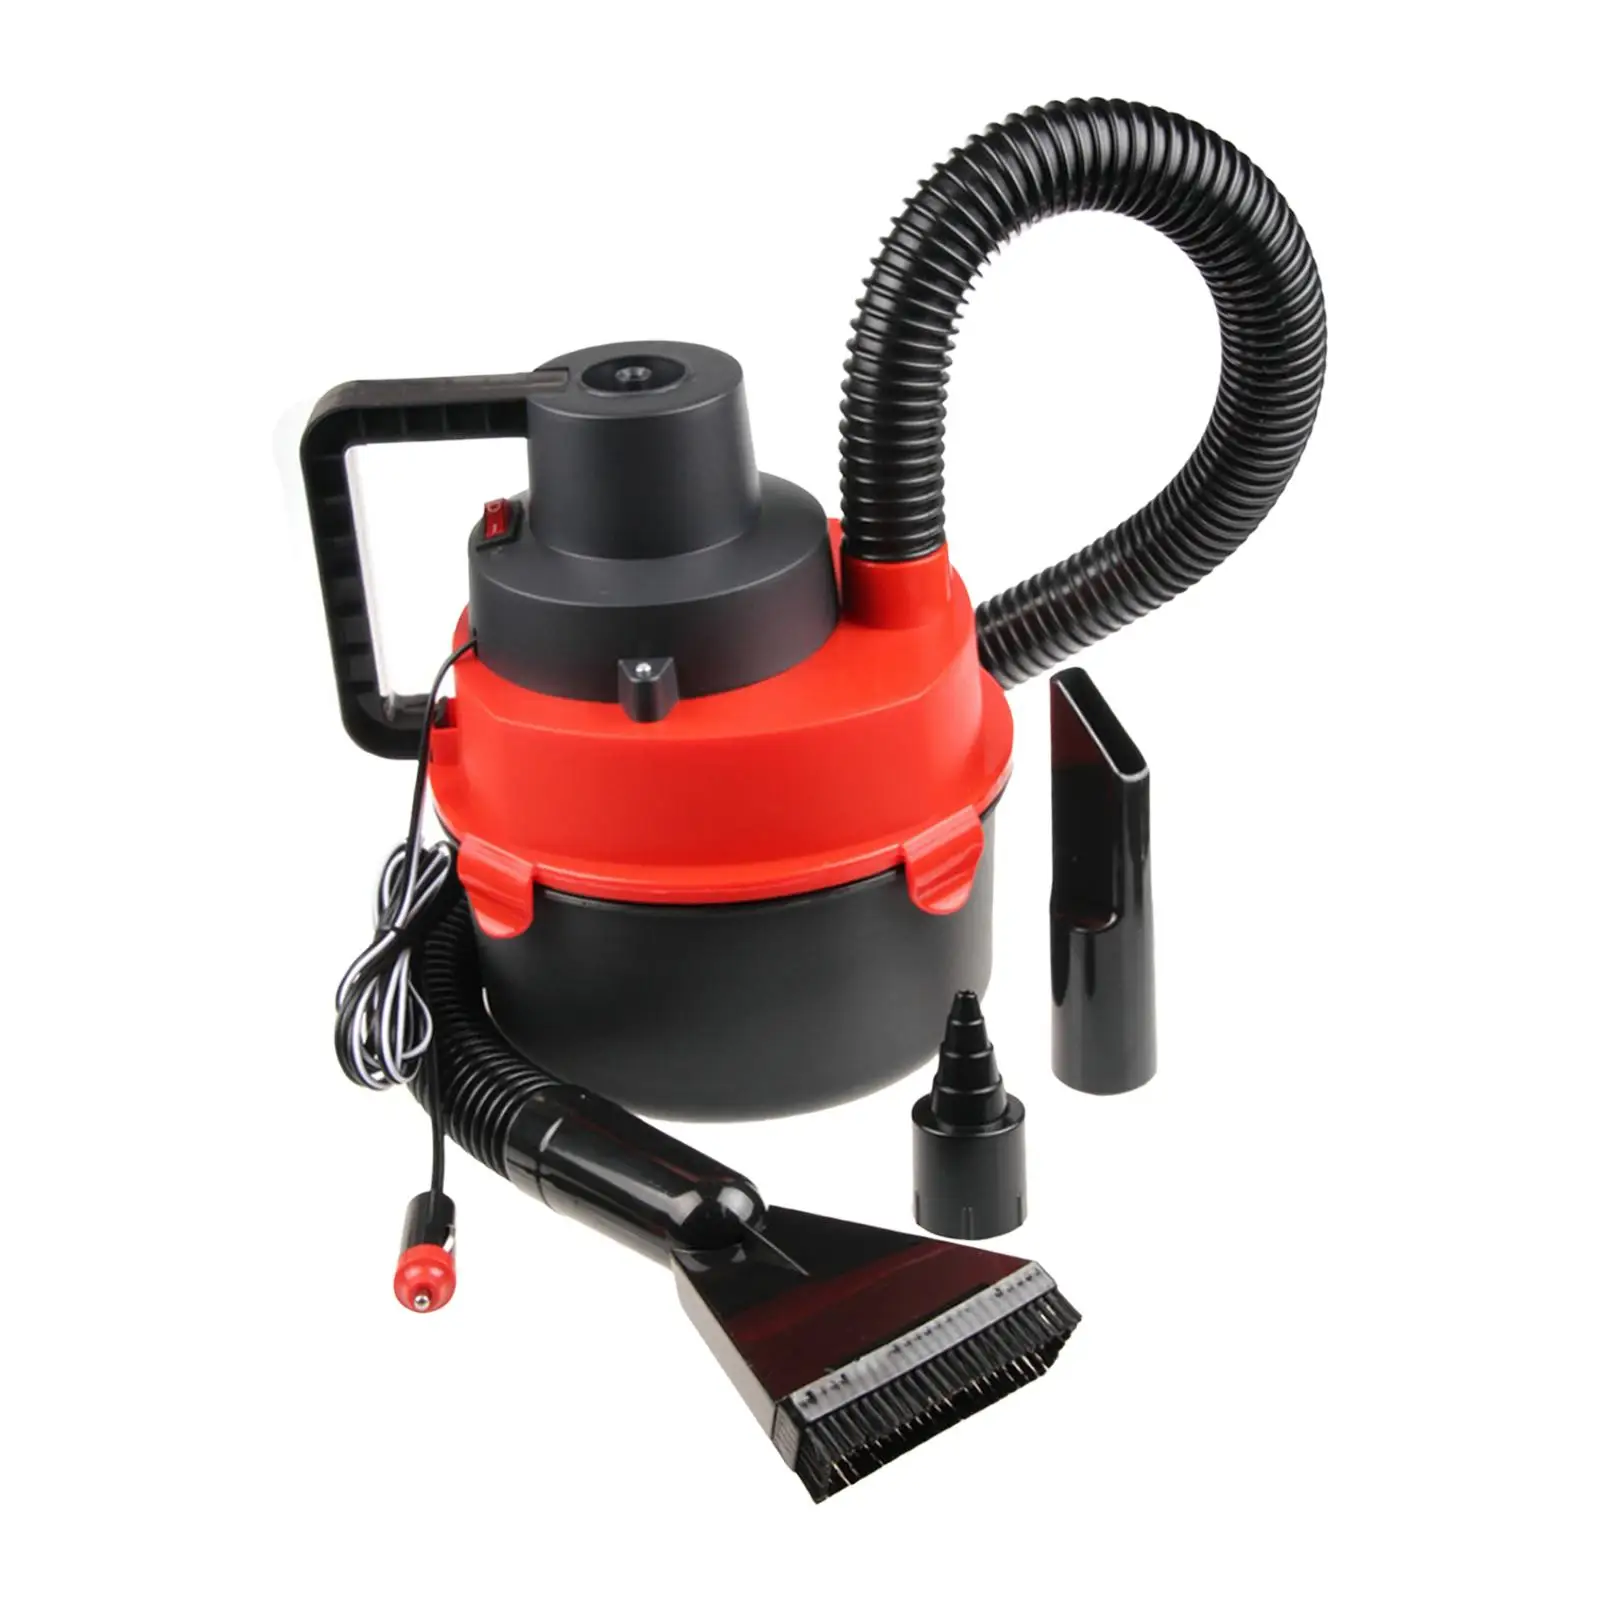 12V Wet/Dry Car Canister Vacuum Lightweight Interior Detailing Flexible 3ft Hose Wet or Dry Pickup Powerful Suction Portable VAC